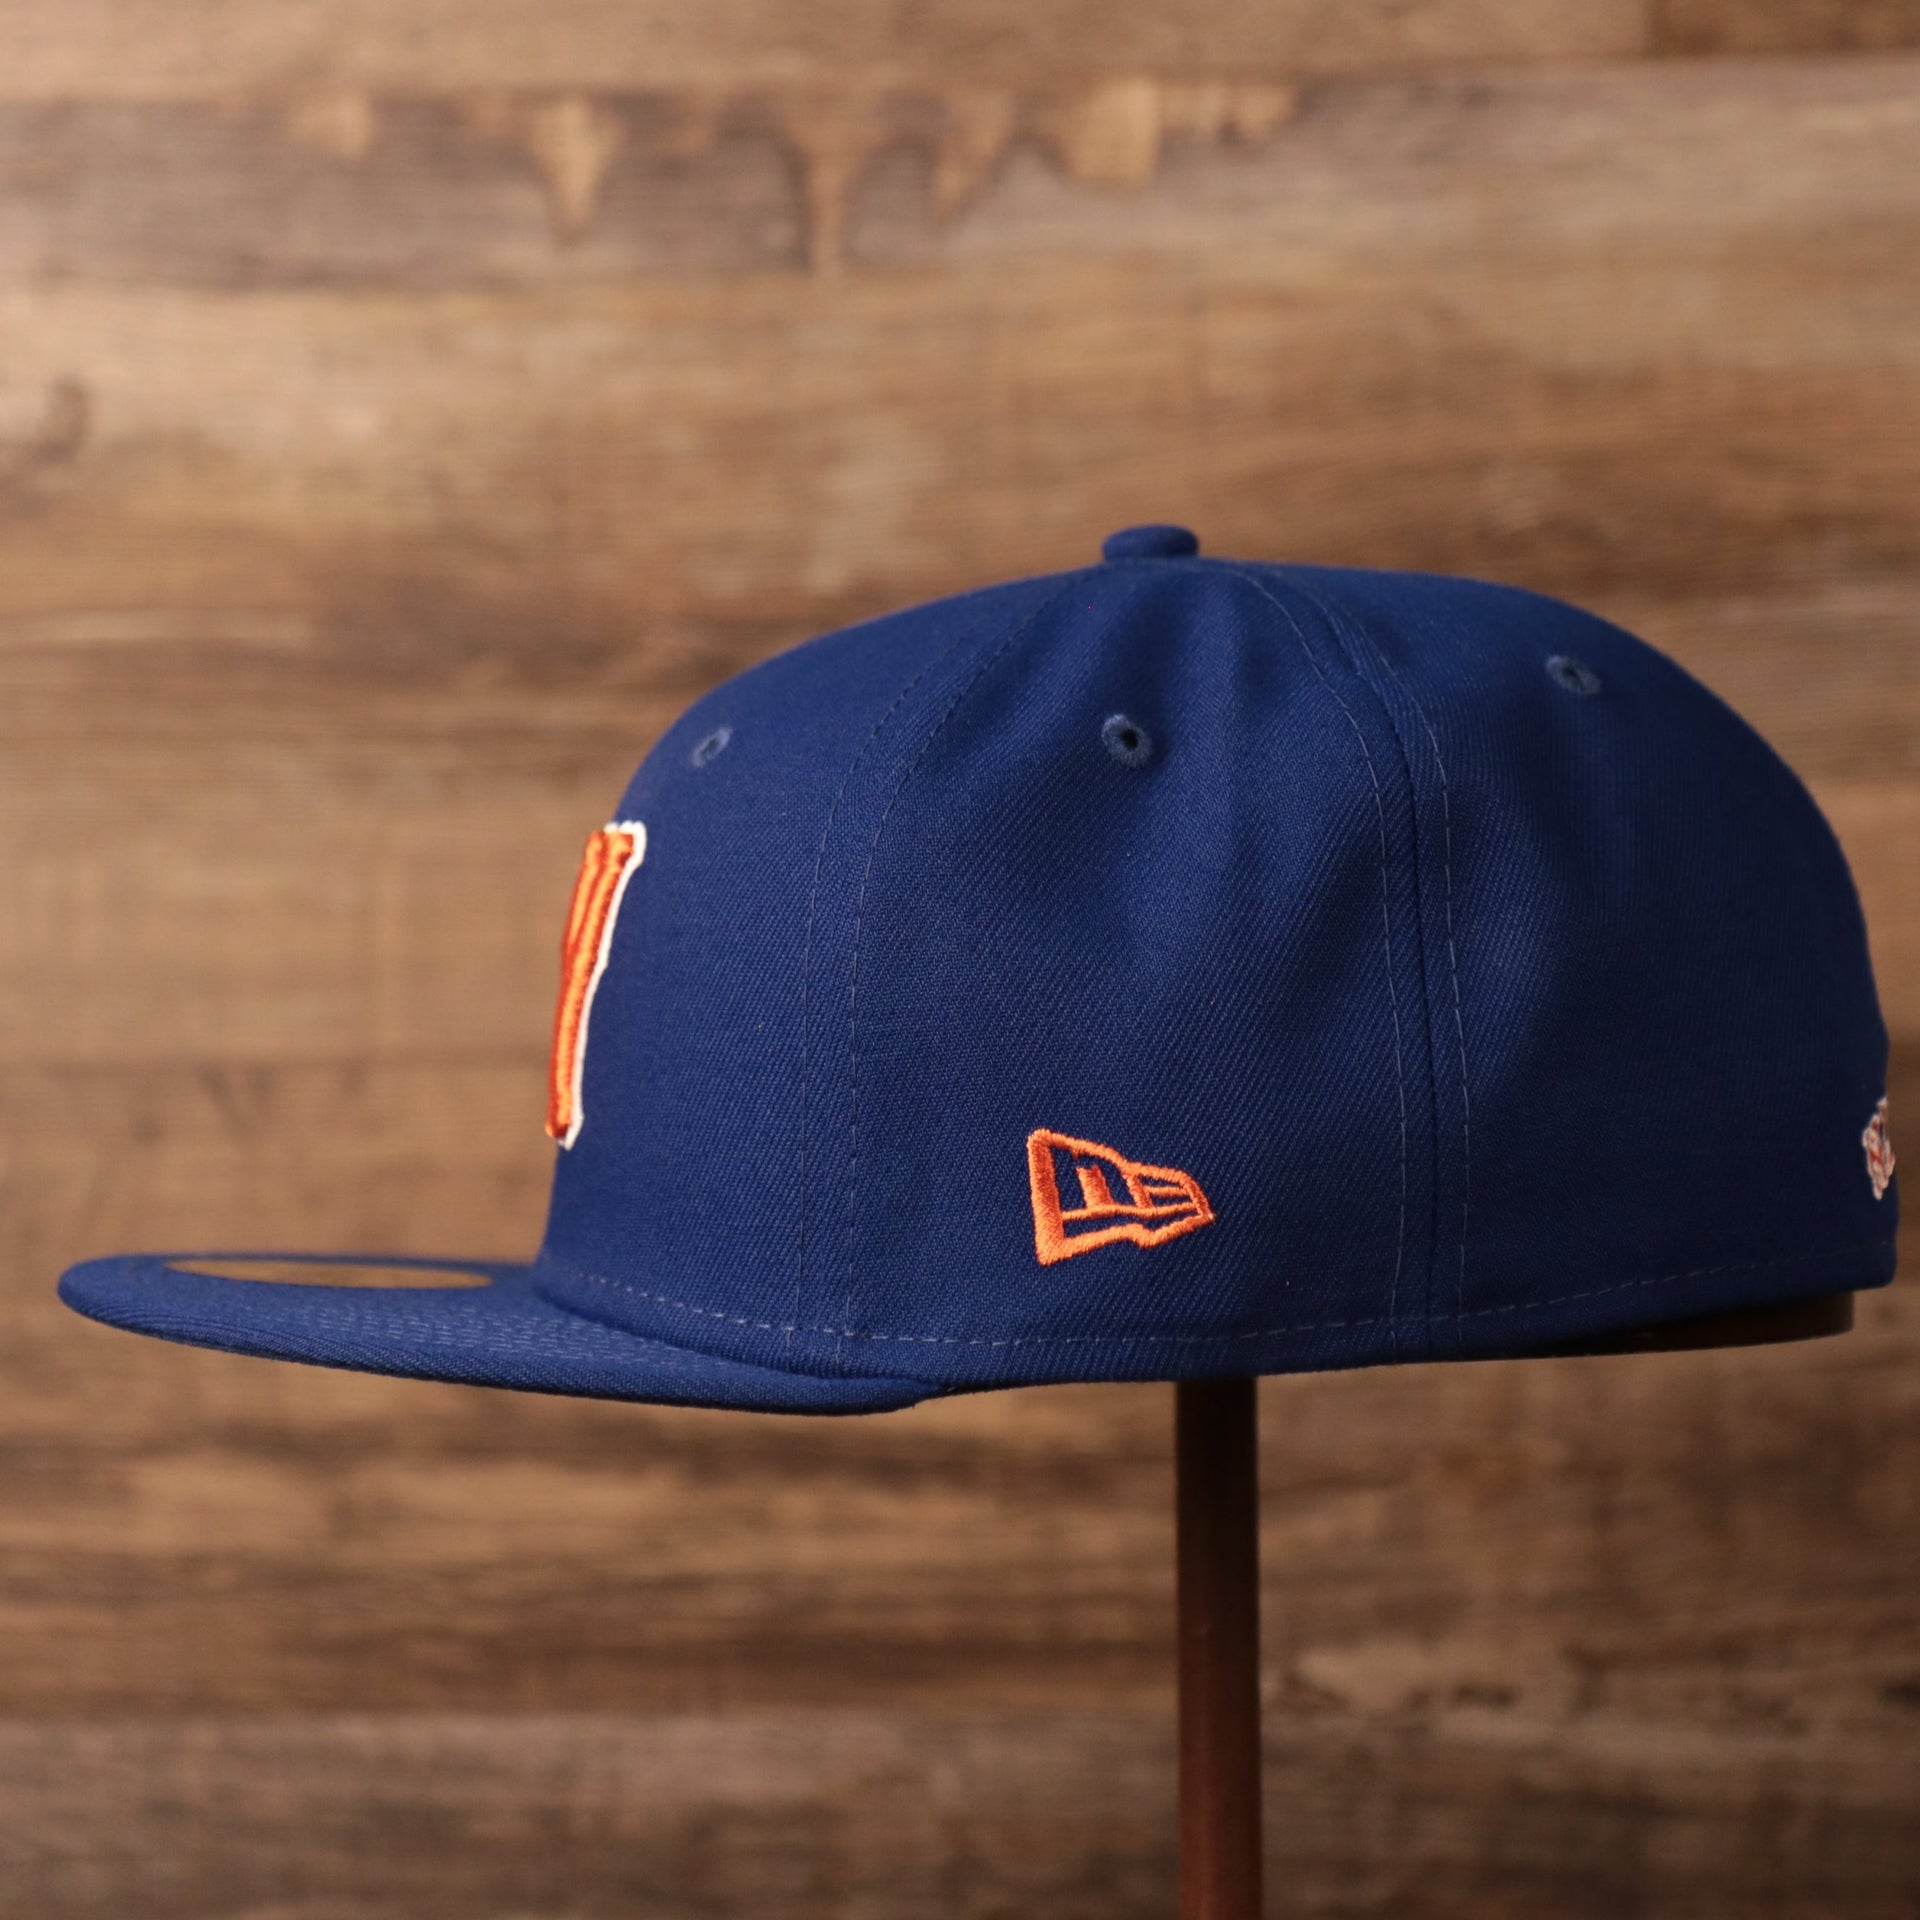 The New Era logo on the left side of the New York Mets blue fitted hat.